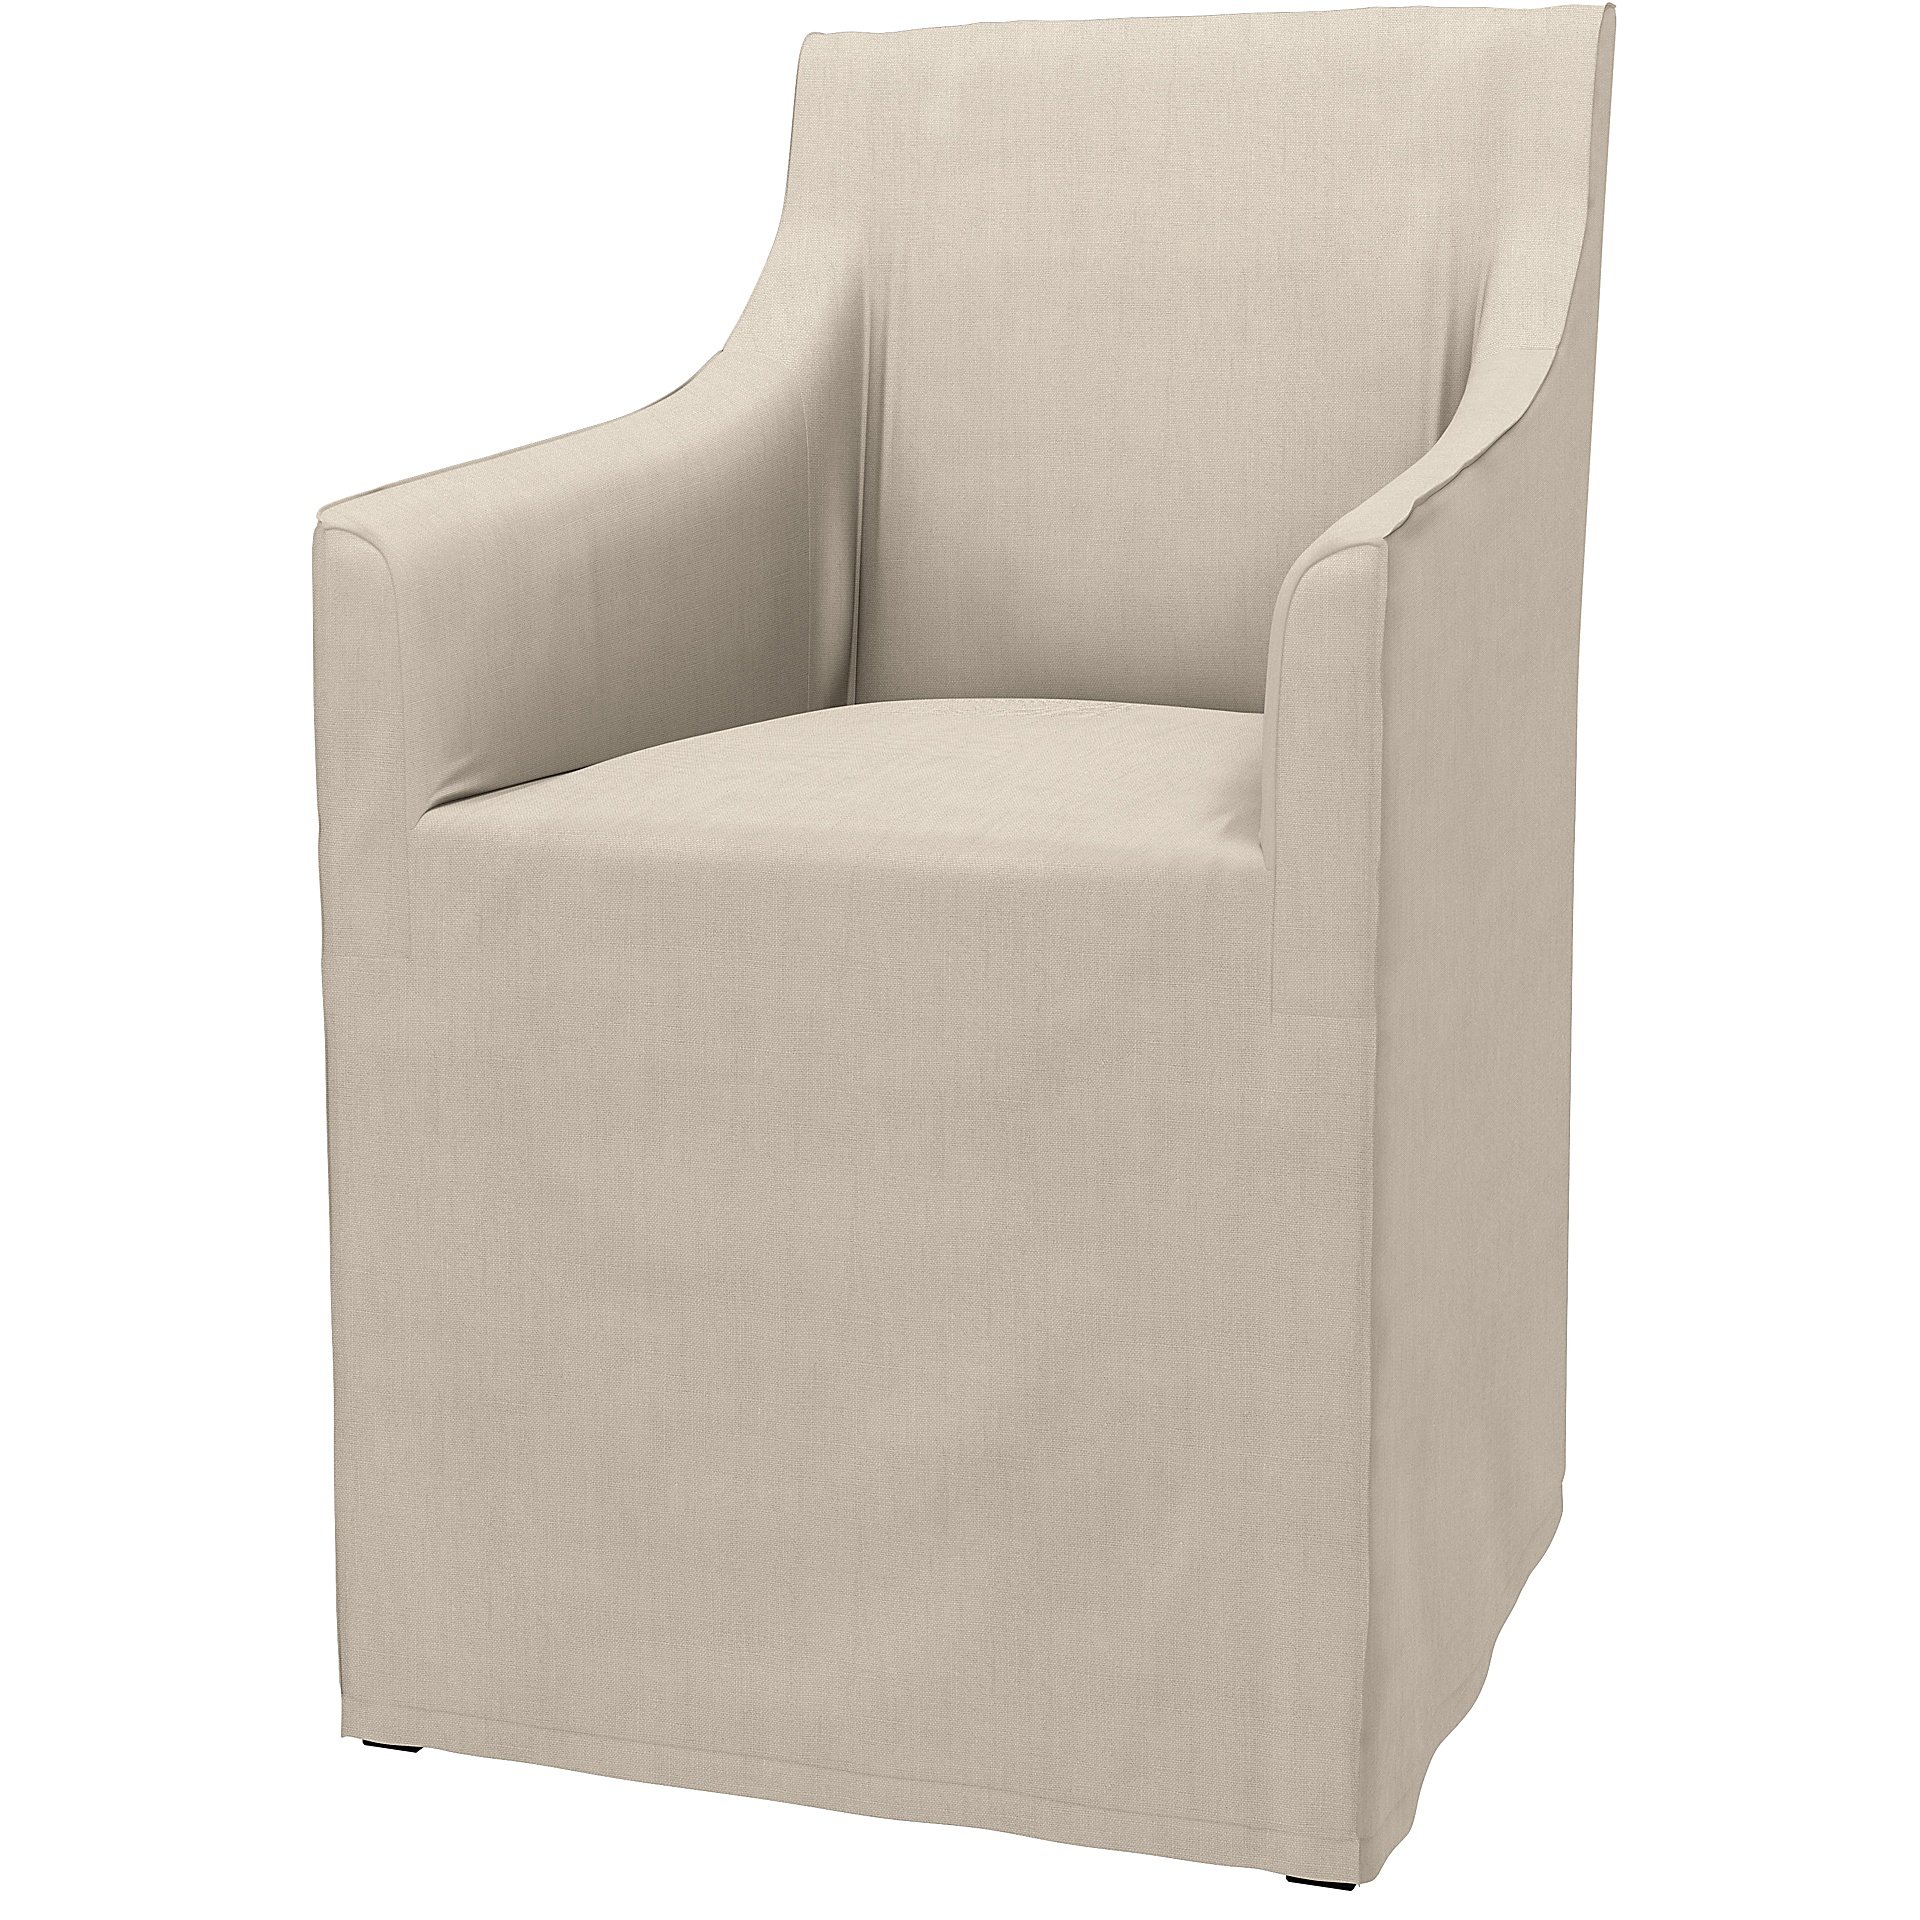 IKEA - Sakarias Chair with Armrests Cover, Parchment, Linen - Bemz